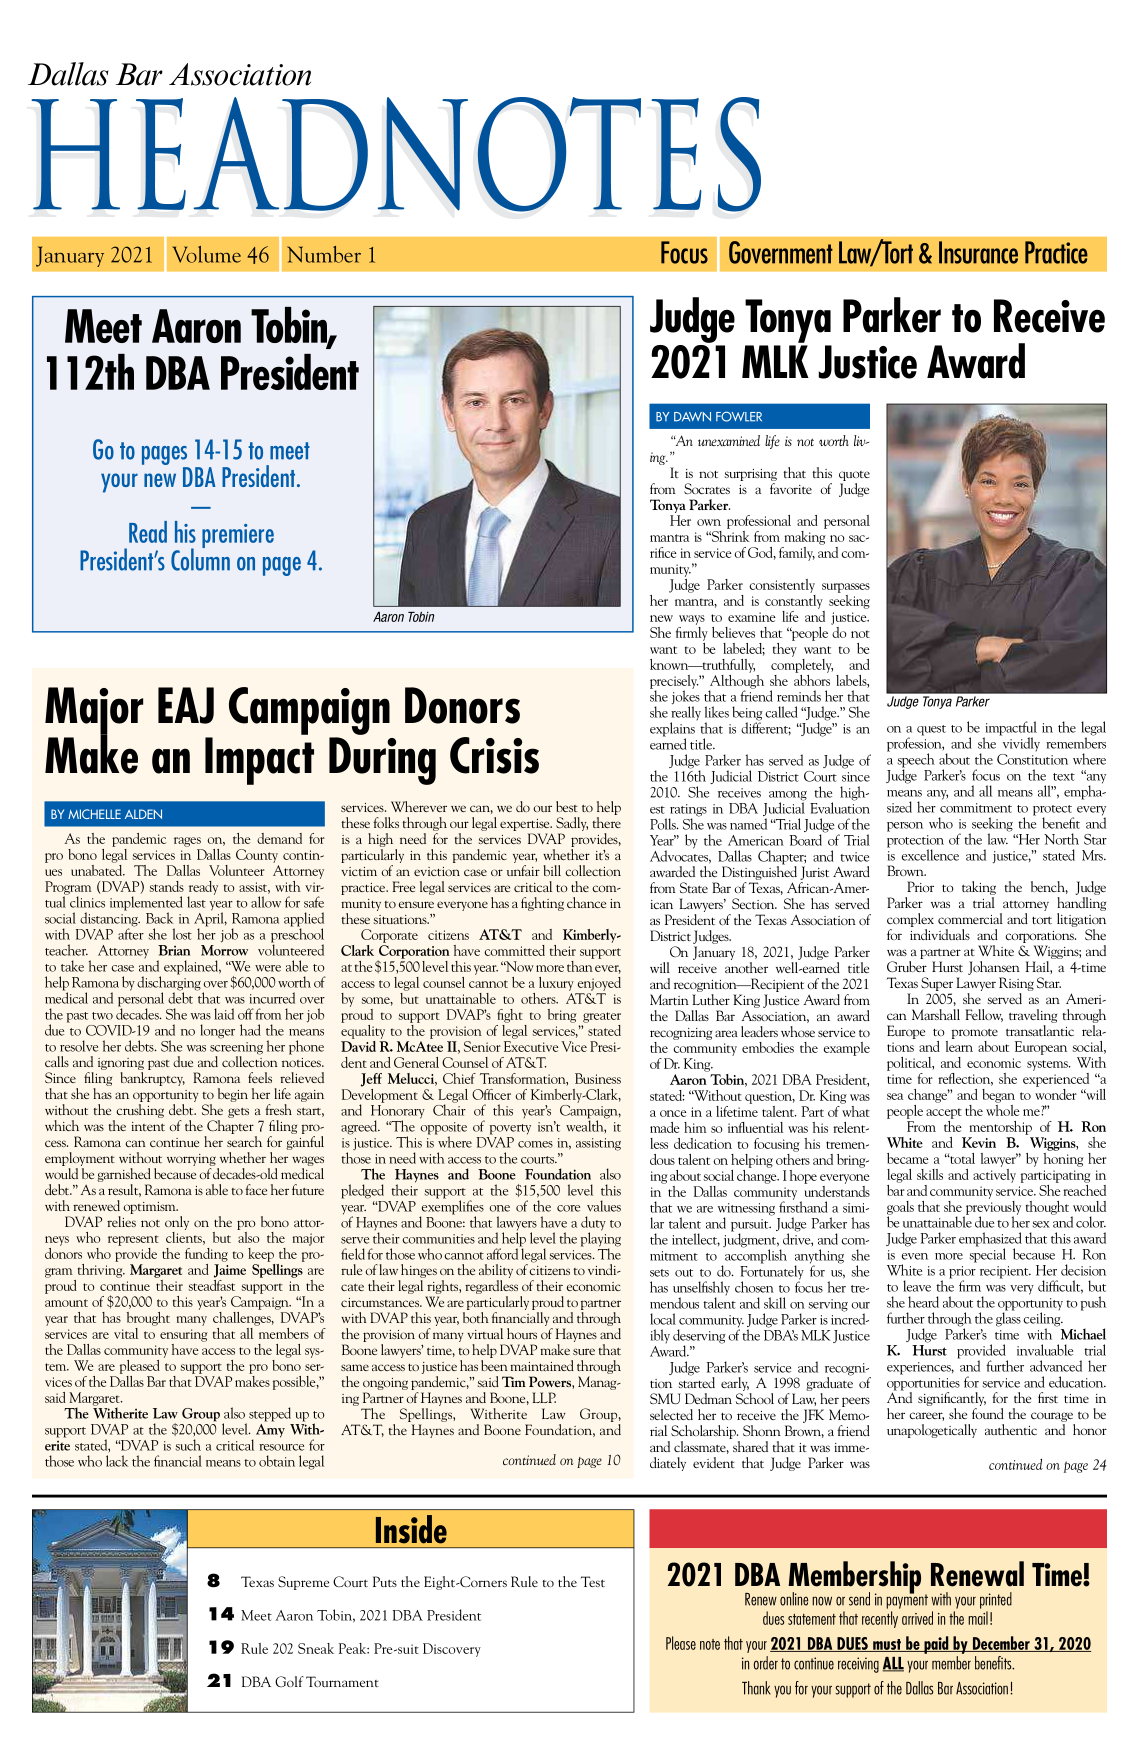 handle is hein.barjournals/hdba0046 and id is 1 raw text is: Dallas Bar Association
HE111111S

Volume 46 Number 1

Meet Aaron Tobin,
112th DBA President
Go to pages 14-15 to meet
your new DBA President.
Read his premiere
President's Column on page 4.

Aaron Tobin

Major EAJ Campaign Donors
Make an Impact During Crisis

BY MICHELLEADE
As the pandemic rages on, the demand for
pro bono legal services in Dallas County contin-
ues unabated. The Dallas Volunteer Attorney
Program (DVAP) stands ready to assist, with vir-
tual clinics implemented last year to allow for safe
social distancing. Back in April, Ramona applied
with DVAP after she lost her job as a preschool
teacher. Attorney Brian Morrow volunteered
to take her case and explained, We were able to
help Ramona by discharging over $60,000 worth of
medical and personal debt that was incurred over
the past two decades. She was laid off from her job
due to COVID-19 and no longer had the means
to resolve her debts. She was screening her phone
calls and ignoring past due and collection notices.
Since filing bankruptcy, Ramona feels relieved
that she has an opportunity to begin her life again
without the crushing debt. She gets a fresh start,
which was the intent of the Chapter 7 filing pro-
cess. Ramona can continue her search for gainful
employment without worrying whether her wages
would be garnished because of decades-old medical
debt. As a result, Ramona is able to face her future
with renewed optimism.
DVAP relies not only on the pro bono attor-
neys who represent clients, but also the major
donors who provide the funding to keep the pro-
gram thriving. Margaret and Jaime Spellings are
proud to continue their steadfast support in the
amount of $20,000 to this year's Campaign. In a
year that has brought many challenges, DVAP's
services are vital to ensuring that all members of
the Dallas community have access to the legal sys-
tem. We are pleased to support the pro bono ser-
vices of the Dallas Bar that DVAP makes possible,
said Margaret.
The Witherite Law Group also stepped up to
support DVAP at the $20,000 level. Amy With-
erite stated, DVAP is such a critical resource for
those who lack the financial means to obtain legal

services. Wherever we can, we do our best to help
these folks through our legal expertise. Sadly, there
is a high need for the services DVAP provides,
particularly in this pandemic year, whether it's a
victim of an eviction case or unfair bill collection
practice. Free legal services are critical to the com-
munity to ensure everyone has a fighting chance in
these situations.
Corporate citizens AT&T and Kimberly-
Clark Corporation have committed their support
at the $15,500 level this year. Now more than ever,
access to legal counsel cannot be a luxury enjoyed
by some, but unattainable to others. AT&T is
proud to support DVAP's fight to bring greater
equality to the provision of legal services, stated
David R. McAtee II, Senior Executive Vice Presi-
dent and General Counsel of AT&T.
Jeff Melucci, Chief Transformation, Business
Development & Legal Officer of Kimberly-Clark,
and Honorary Chair of this year's Campaign,
agreed. The opposite of poverty isn't wealth, it
is justice. This is where DVAP comes in, assisting
those in need with access to the courts.
The Haynes and Boone Foundation also
pledged their support at the $15,500 level this
year. DVAP exemplifies one of the core values
of Haynes and Boone: that lawyers have a duty to
serve their communities and help level the playing
field for those who cannot afford legal services. The
rule of law hinges on the ability of citizens to vindi-
cate their legal rights, regardless of their economic
circumstances. We are particularly proud to partner
with DVAP this year, both financially and through
the provision of many virtual hours of Haynes and
Boone lawyers' time, to help DVAP make sure that
same access to justice has been maintained through
the ongoing pandemic, said Tim Powers, Manag-
ing Partner of Haynes and Boone, LLP.
The   Spellings,  Witherite  Law  Group,
AT&T, the Haynes and Boone Foundation, and
continued on page 10

Focus Government Law/Tort & Insurance Practice
Judge Tonya Parker to Receive
2021 MLK Justice Award

BY DAWN FOWLER
An unexamined life is not worth liv-
ing.
It is not surprising that this quote
from Socrates is a favorite of Judge
Tonya Parker.
Her own professional and personal
mantra is Shrink from making no sac-
rifice in service of God, family, and com-
munity.
Judge Parker consistently surpasses
her mantra, and is constantly seeking
new ways to examine life and justice.
She firmly believes that people do not
want to be labeled; they want to be
known-truthfully,   completely,  and
precisely. Although she abhors labels,
she jokes that a friend reminds her that
she really likes being called Judge. She
explains that is different; Judge is an
earned title.
Judge Parker has served as Judge of
the 116th Judicial District Court since
2010. She receives among the high-
est ratings in DBA Judicial Evaluation
Polls. She was named Trial Judge of the
Year by the American Board of Trial
Advocates, Dallas Chapter; and twice
awarded the Distinguished Jurist Award
from State Bar of Texas, African-Amer-
ican Lawyers' Section. She has served
as President of the Texas Association of
District Judges.
On January 18, 2021, Judge Parker
will receive another well-earned title
and recognition-Recipient of the 2021
Martin Luther King Justice Award from
the Dallas Bar Association, an award
recognizing area leaders whose service to
the community embodies the example
of Dr. King.
Aaron Tobin, 2021 DBA President,
stated: Without question, Dr. King was
a once in a lifetime talent. Part of what
made him so influential was his relent-
less dedication to focusing his tremen-
dous talent on helping others and bring-
ing about social change. I hope everyone
in the Dallas community understands
that we are witnessing firsthand a simi-
lar talent and pursuit. Judge Parker has
the intellect, judgment, drive, and com-
mitment to accomplish anything she
sets out to do. Fortunately for us, she
has unselfishly chosen to focus her tre-
mendous talent and skill on serving our
local community. Judge Parker is incred-
ibly deserving of the DBA's MLK Justice
Award.
Judge Parker's service and recogni-
tion started early, A 1998 graduate of
SMU Dedman School of Law, her peers
selected her to receive the JFK Memo-
rial Scholarship. Shonn Brown, a friend
and classmate, shared that it was imme-
diately evident that Judge Parker was

JuageTonya Parker
on a quest to be impactful in the legal
profession, and she vividly remembers
a speech about the Constitution where
Judge Parker's focus on the text any
means any, and all means all, empha-
sized her commitment to protect every
person who is seeking the benefit and
protection of the law. Her North Star
is excellence and justice, stated Mrs.
Brown.
Prior to taking the bench, Judge
Parker was a trial attorney handling
complex commercial and tort litigation
for individuals and corporations. She
was a partner at White & Wiggins; and
Gruber Hurst Johansen Hail, a 4-time
Texas Super Lawyer Rising Star.
In 2005, she served as an Ameri-
can Marshall Fellow, traveling through
Europe to promote transatlantic rela-
tions and learn about European social,
political, and economic systems. With
time for reflection, she experienced a
sea change and began to wonder will
people accept the whole me?
From the mentorship of H. Ron
White and Kevin B. Wiggins, she
became a total lawyer by honing her
legal skills and actively participating in
bar and community service. She reached
goals that she previously thought would
be unattainable due to her sex and color.
Judge Parker emphasized that this award
is even more special because H. Ron
White is a prior recipient. Her decision
to leave the firm was very difficult, but
she heard about the opportunity to push
further through the glass ceiling.
Judge Parker's time with Michael
K. Hurst provided invaluable trial
experiences, and further advanced her
opportunities for service and education.
And significantly, for the first time in
her career, she found the courage to be
unapologetically authentic and honor
continued on page 24

Inside

8 Texas Supreme Court Puts the Eight-Corners Rule to the Test
1 4 Meet Aaron Tobin, 2021 DBA President

Rule 202 Sneak Peak: Pre-suit Discovery
DBA Golf Tournament

2021 DBA Membership Renewal Time!
Renew online now or send in payment with your printed
dues statement that recently arrived in the mail!
Please note that your 2021 DBA DUES must be paid by December 31, 2020
in order to continue receiving ALL your member benefits.
Thank you for your support of the Dallas Bar Association!

January 2021

Wramma                  n.

19
21


